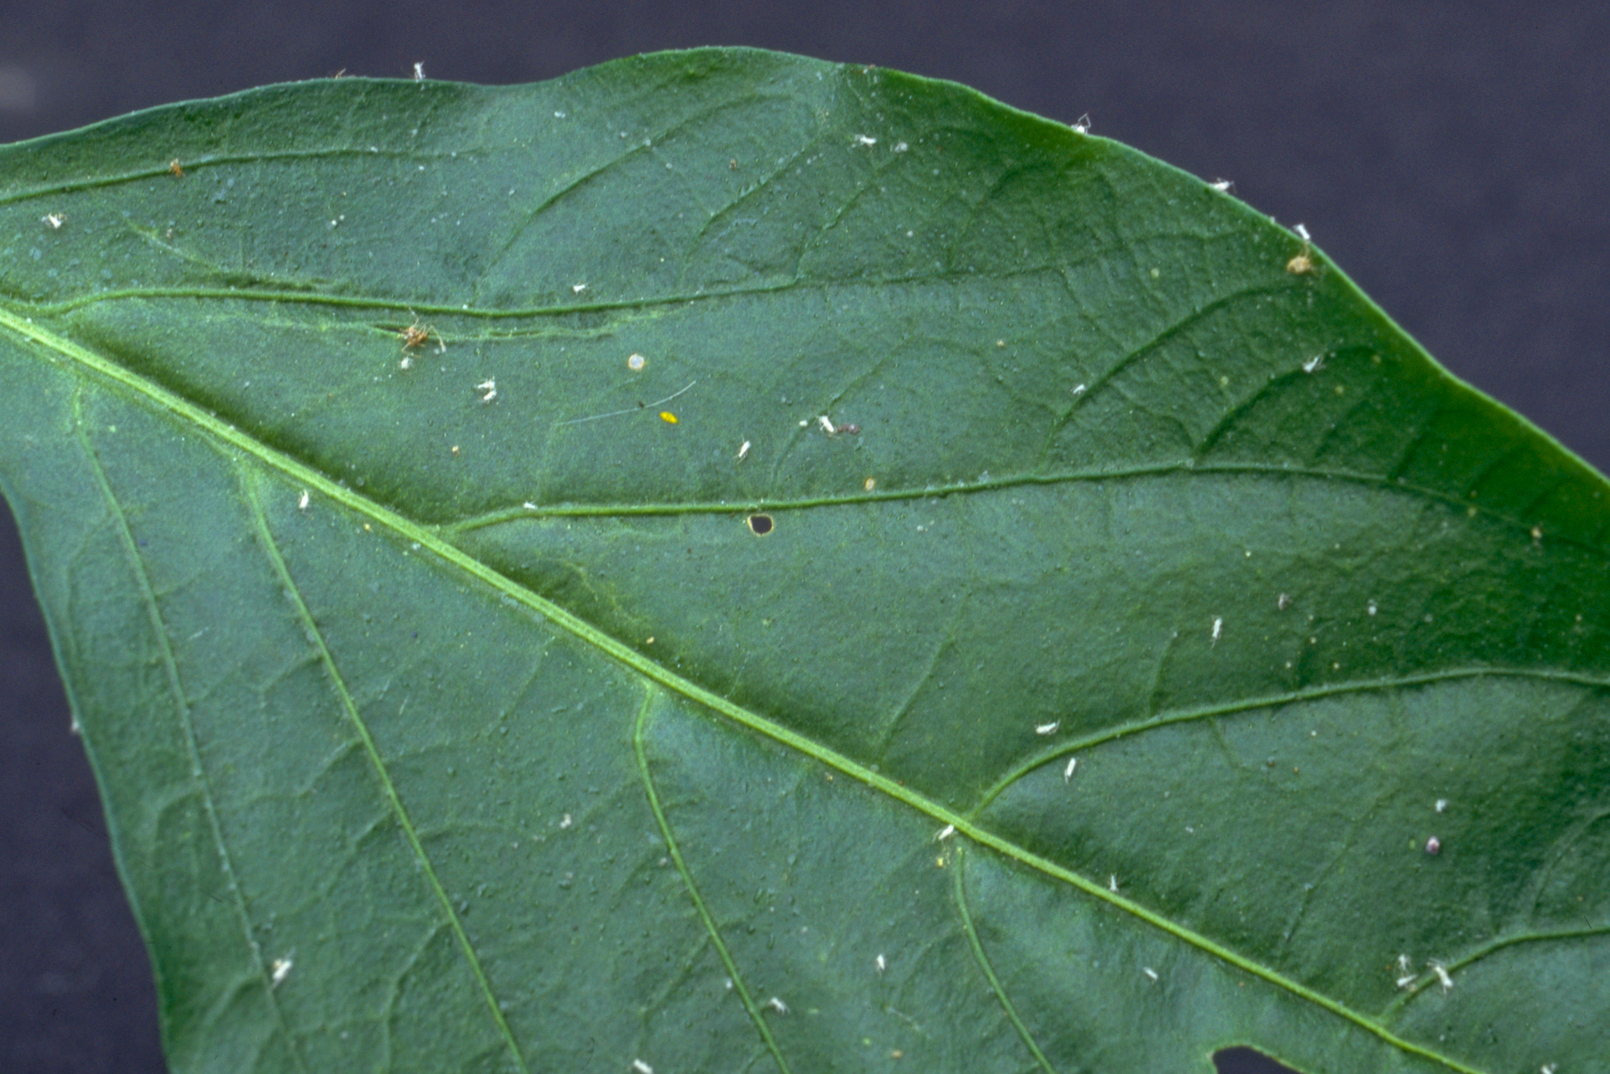 Leaf damage caused by Peach-potato aphid Myzus persicae subsp. nicotianae